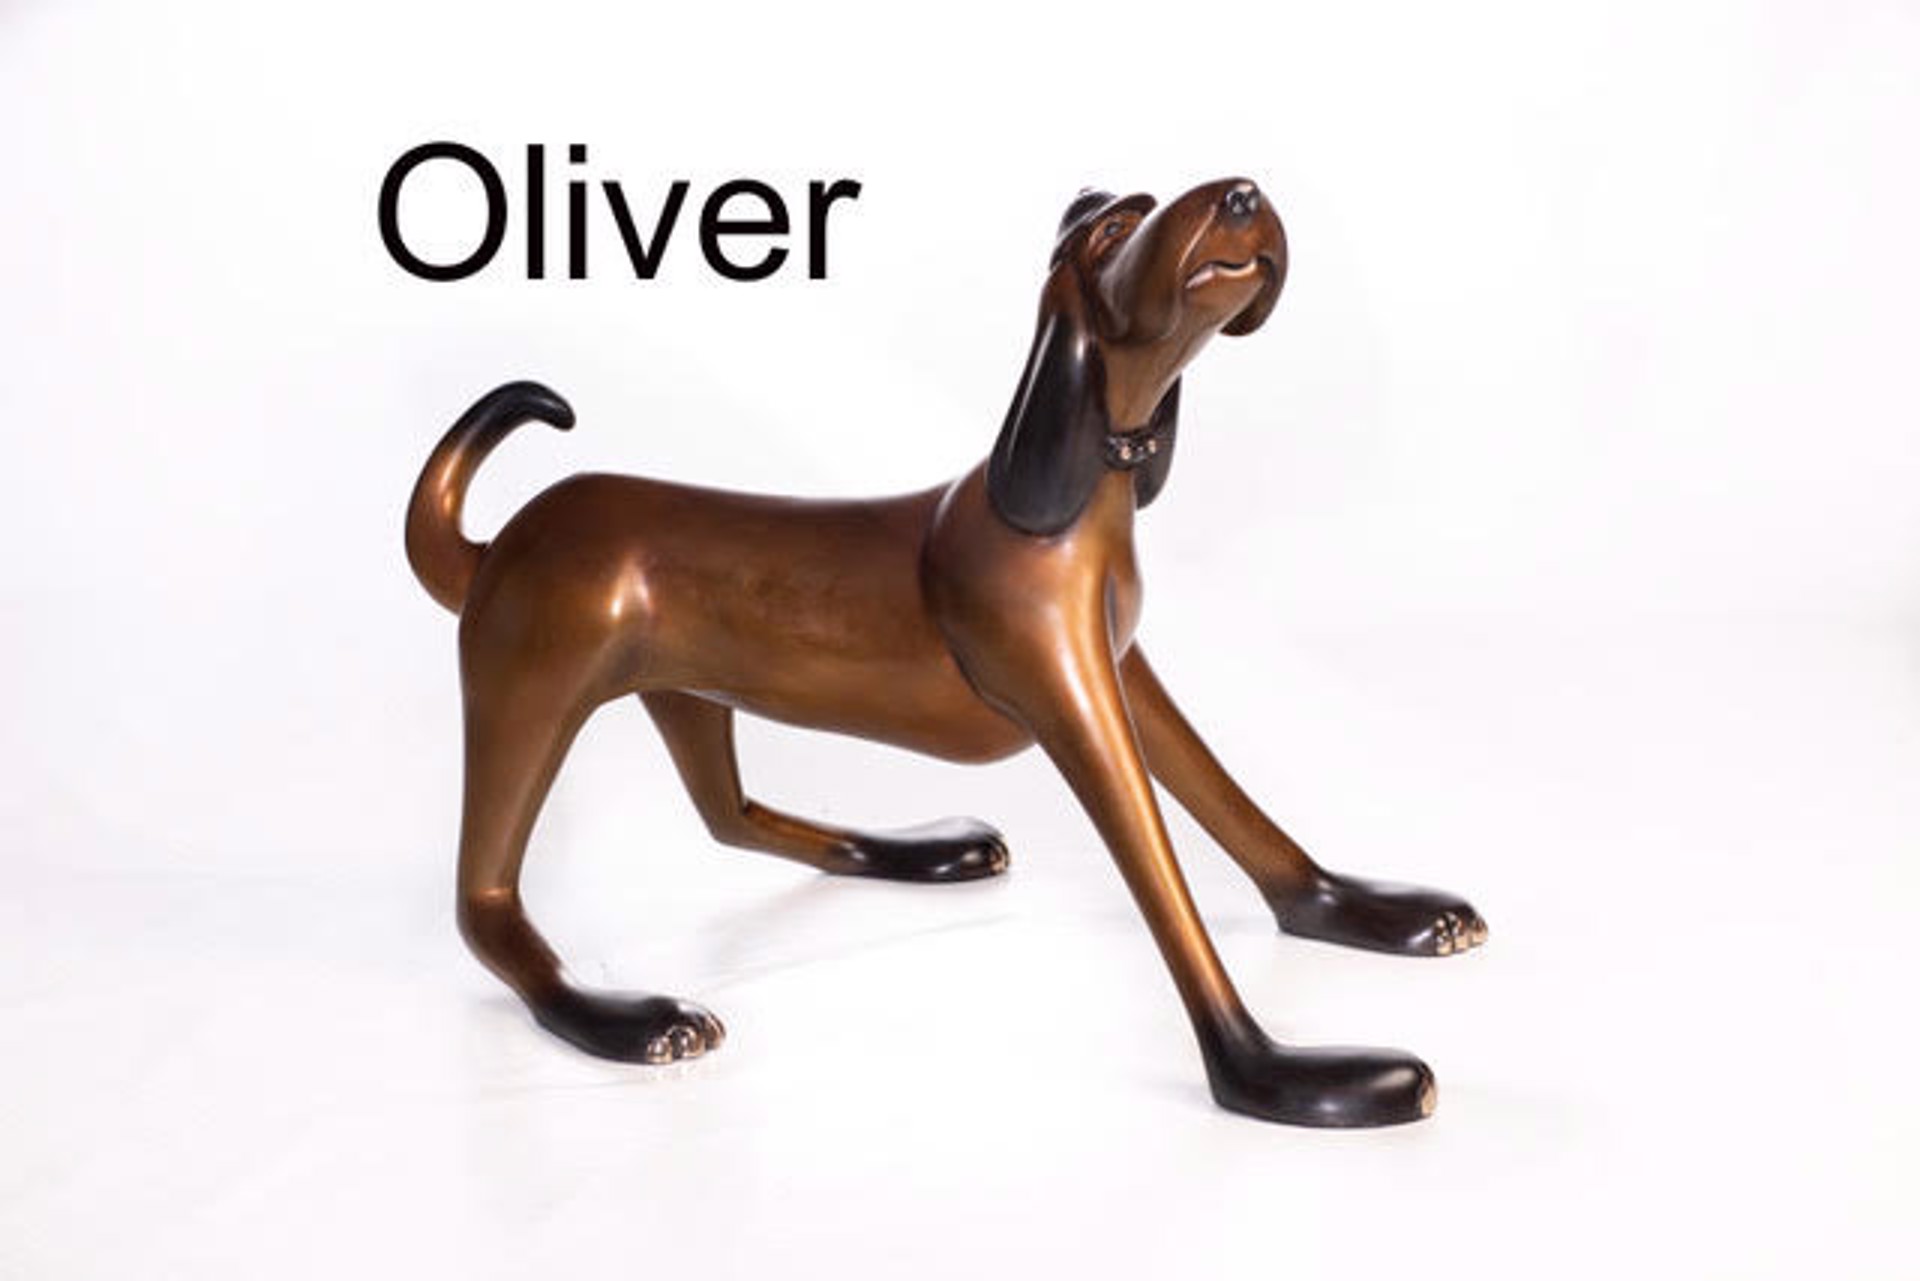 Oliver by Marty Goldstein